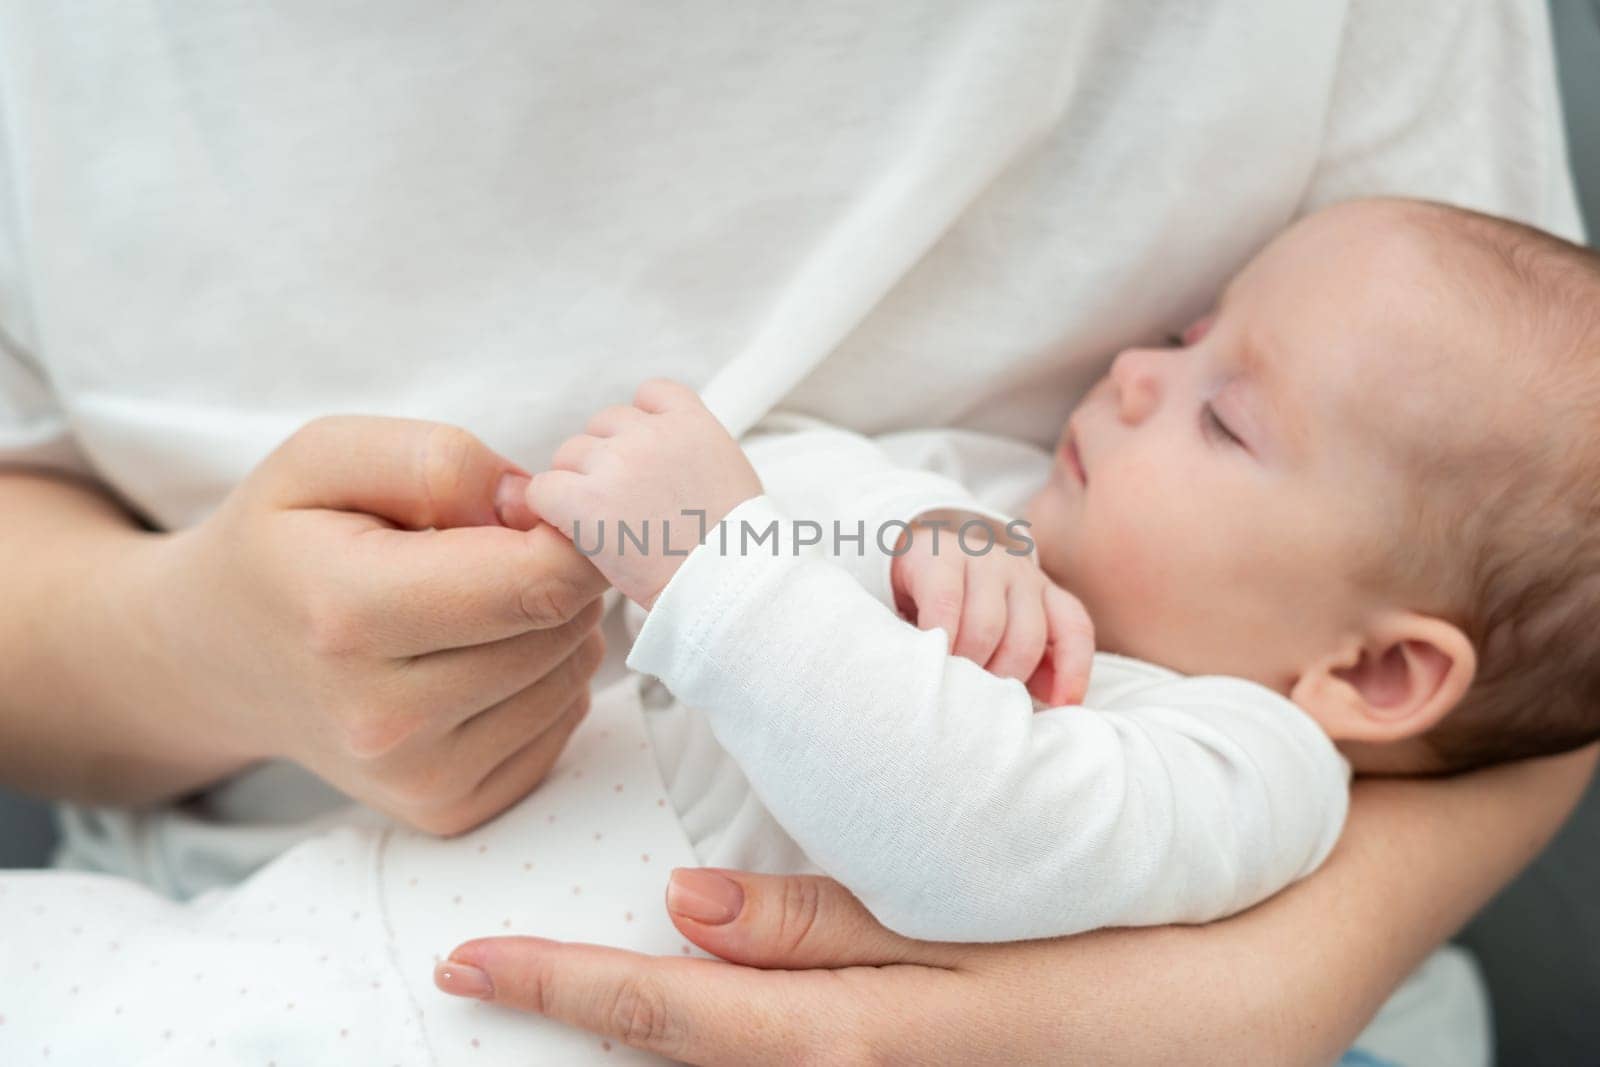 Newborn infant, in a delicate moment, tenderly holds mother's finger emphasizing a deep, unspoken connection